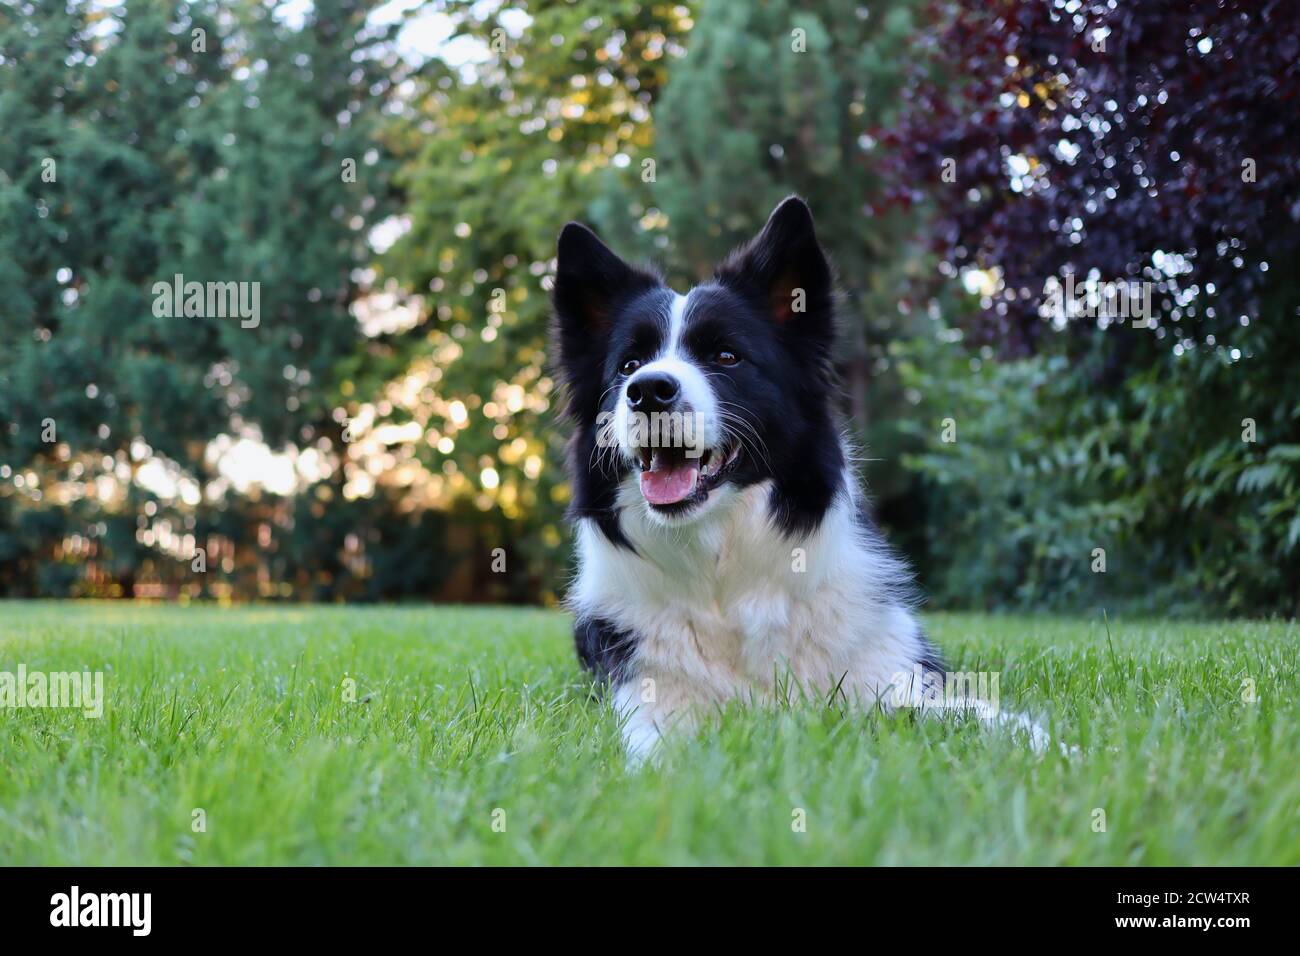 Portrait of Beautiful Border Collie Lying on Grass in the Garden. Black and White Dog being Cute Outside. Furry Animal with Smile on its Face. Stock Photo